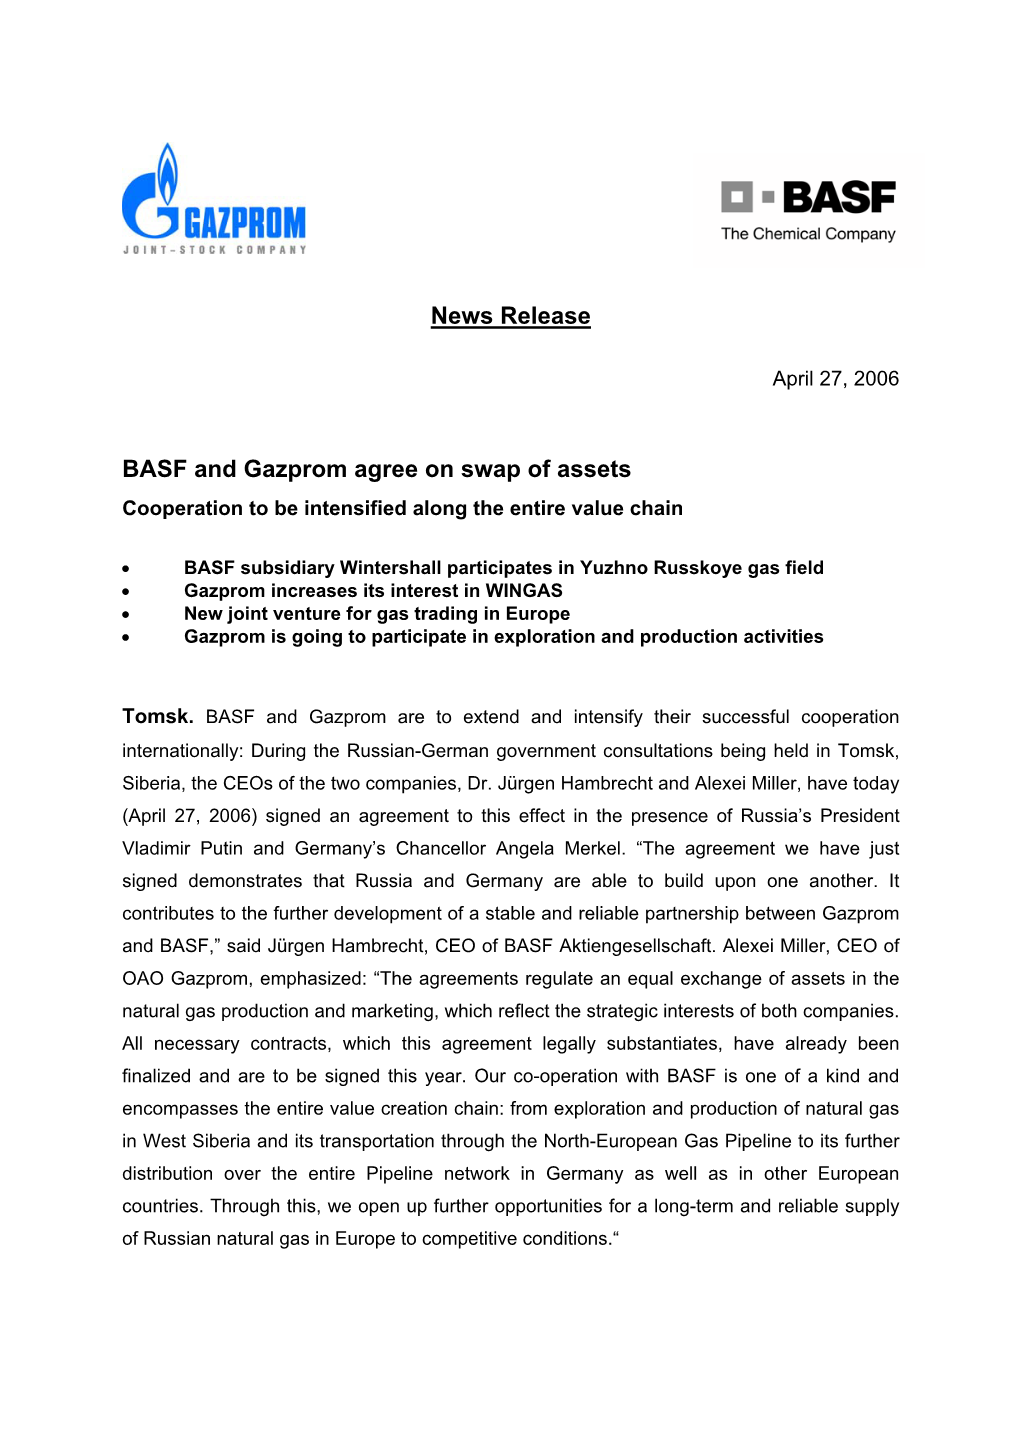 News Release BASF and Gazprom Agree on Swap of Assets